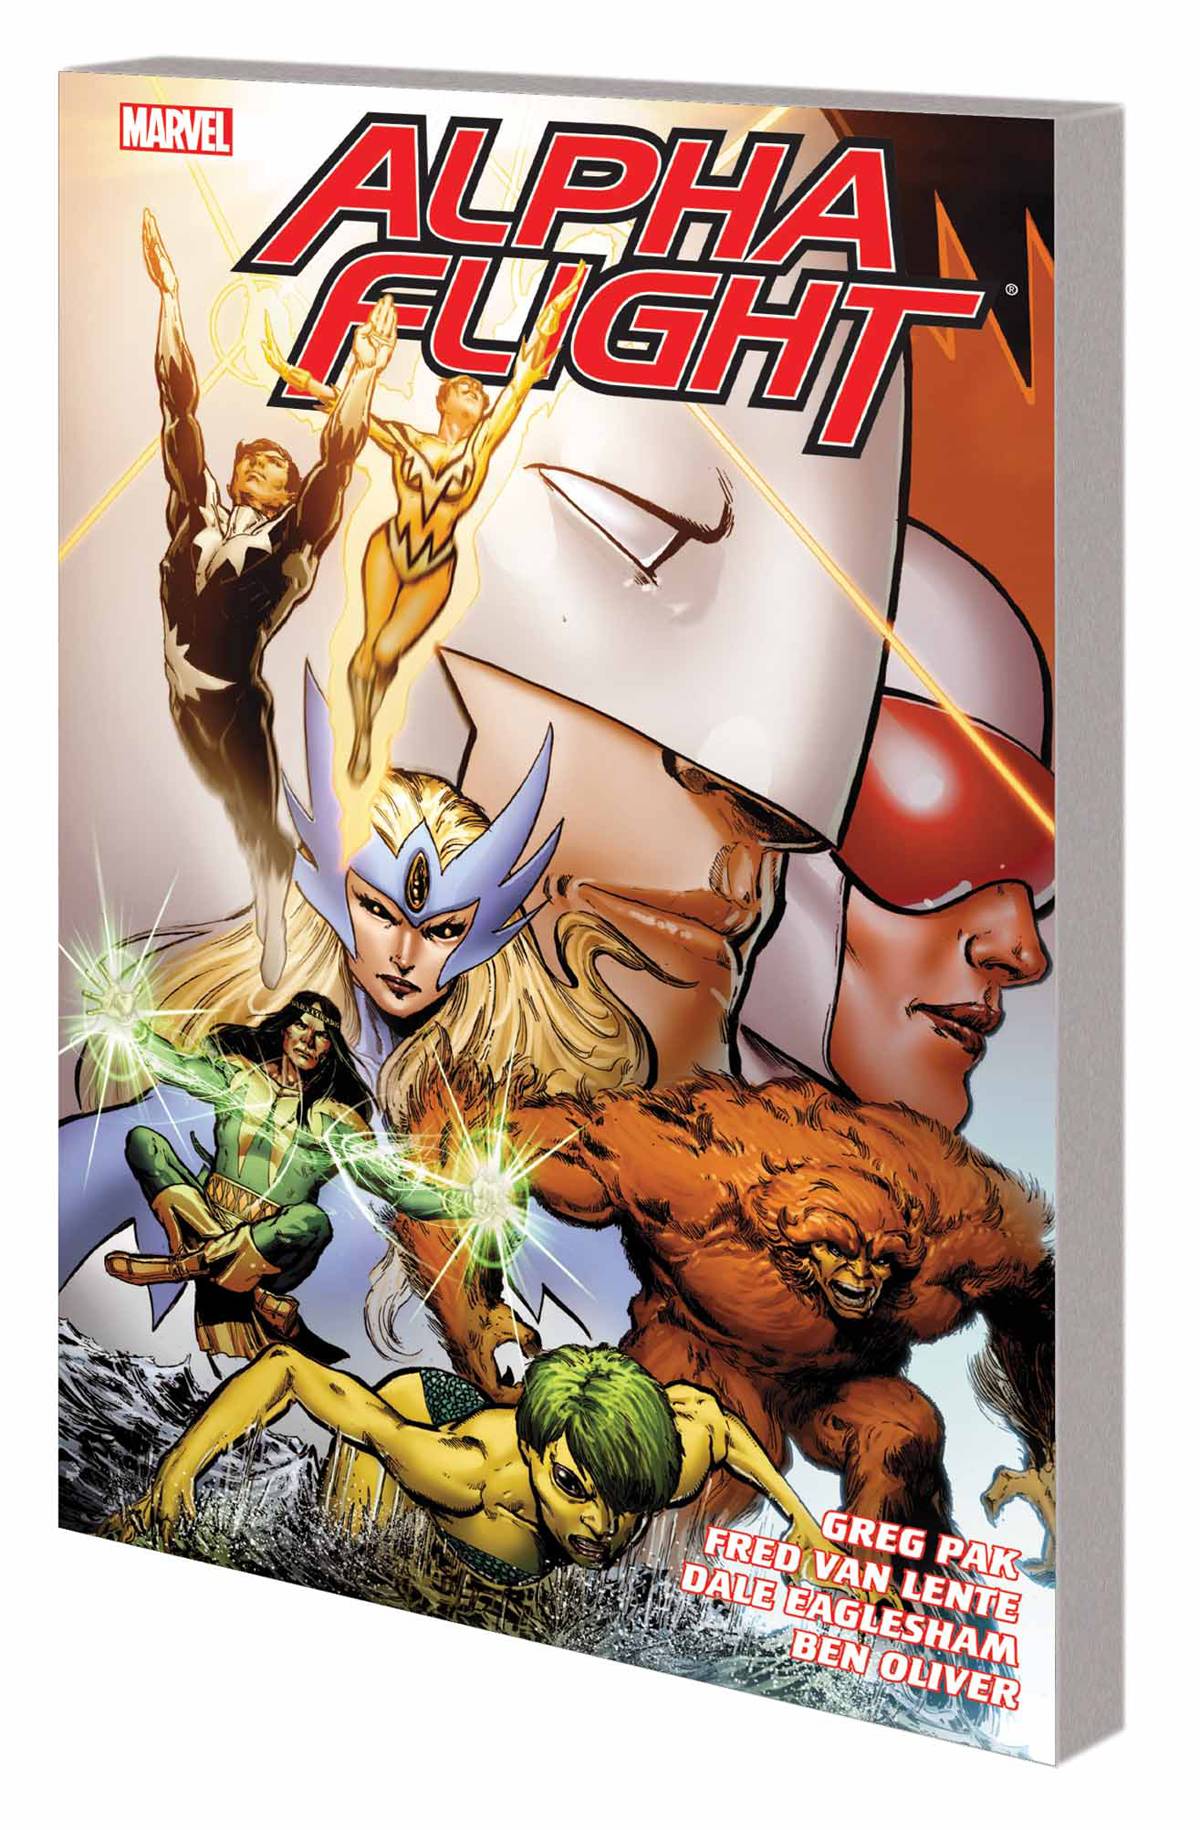 ALPHA FLIGHT COMPLETE SERIES BY PAK AND LENTE TP